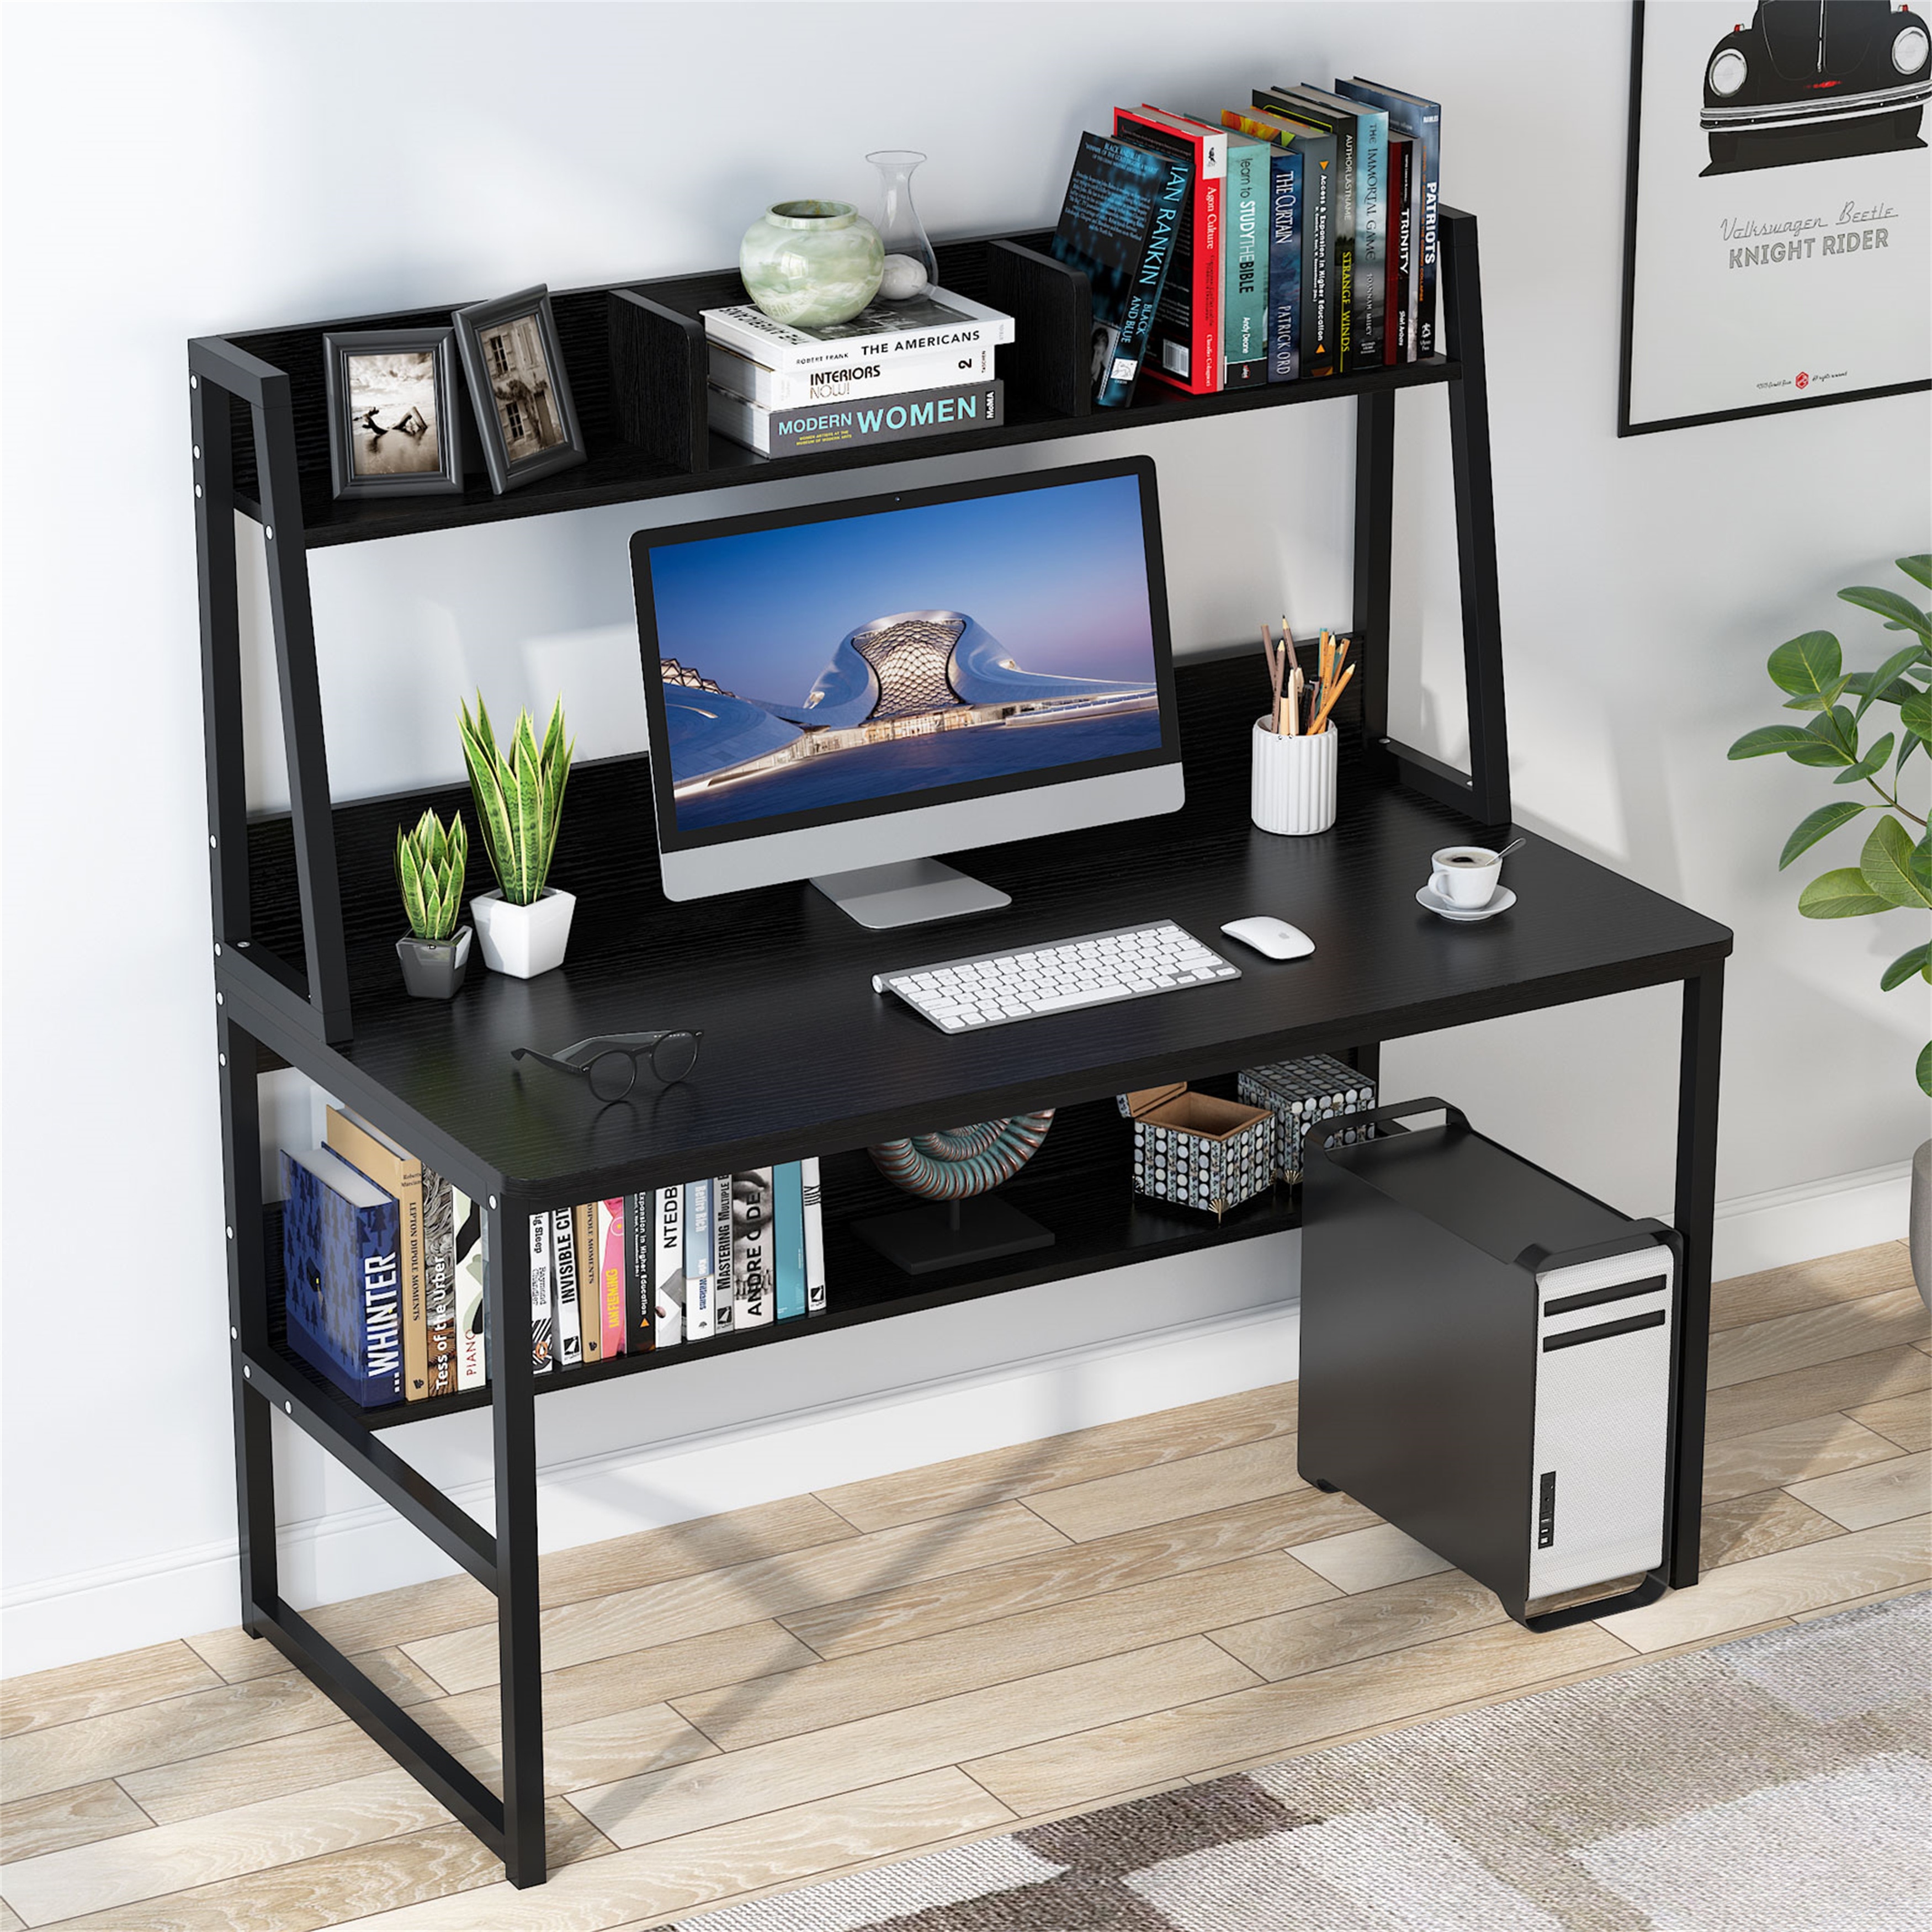 https://ak1.ostkcdn.com/images/products/is/images/direct/f194f92f2c6fca1fcbe05523c3594f70b474627d/47-Inches%C2%A0Computer-Desk-with-Hutch-and-Bookshelf%2C-Home-Office-Desk.jpg